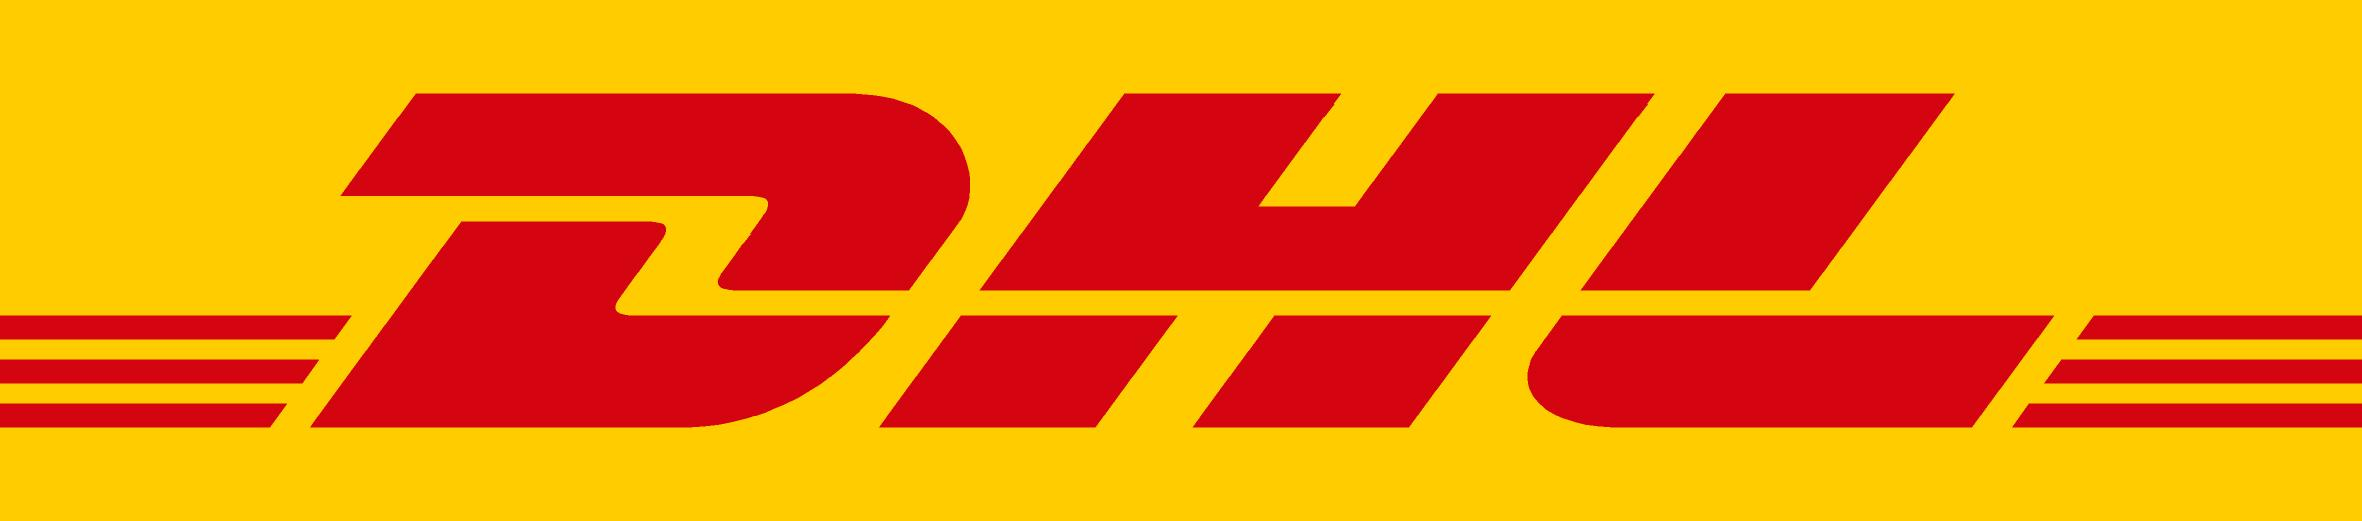 DHL awarded International All Cargo Carrier of the year in Africa